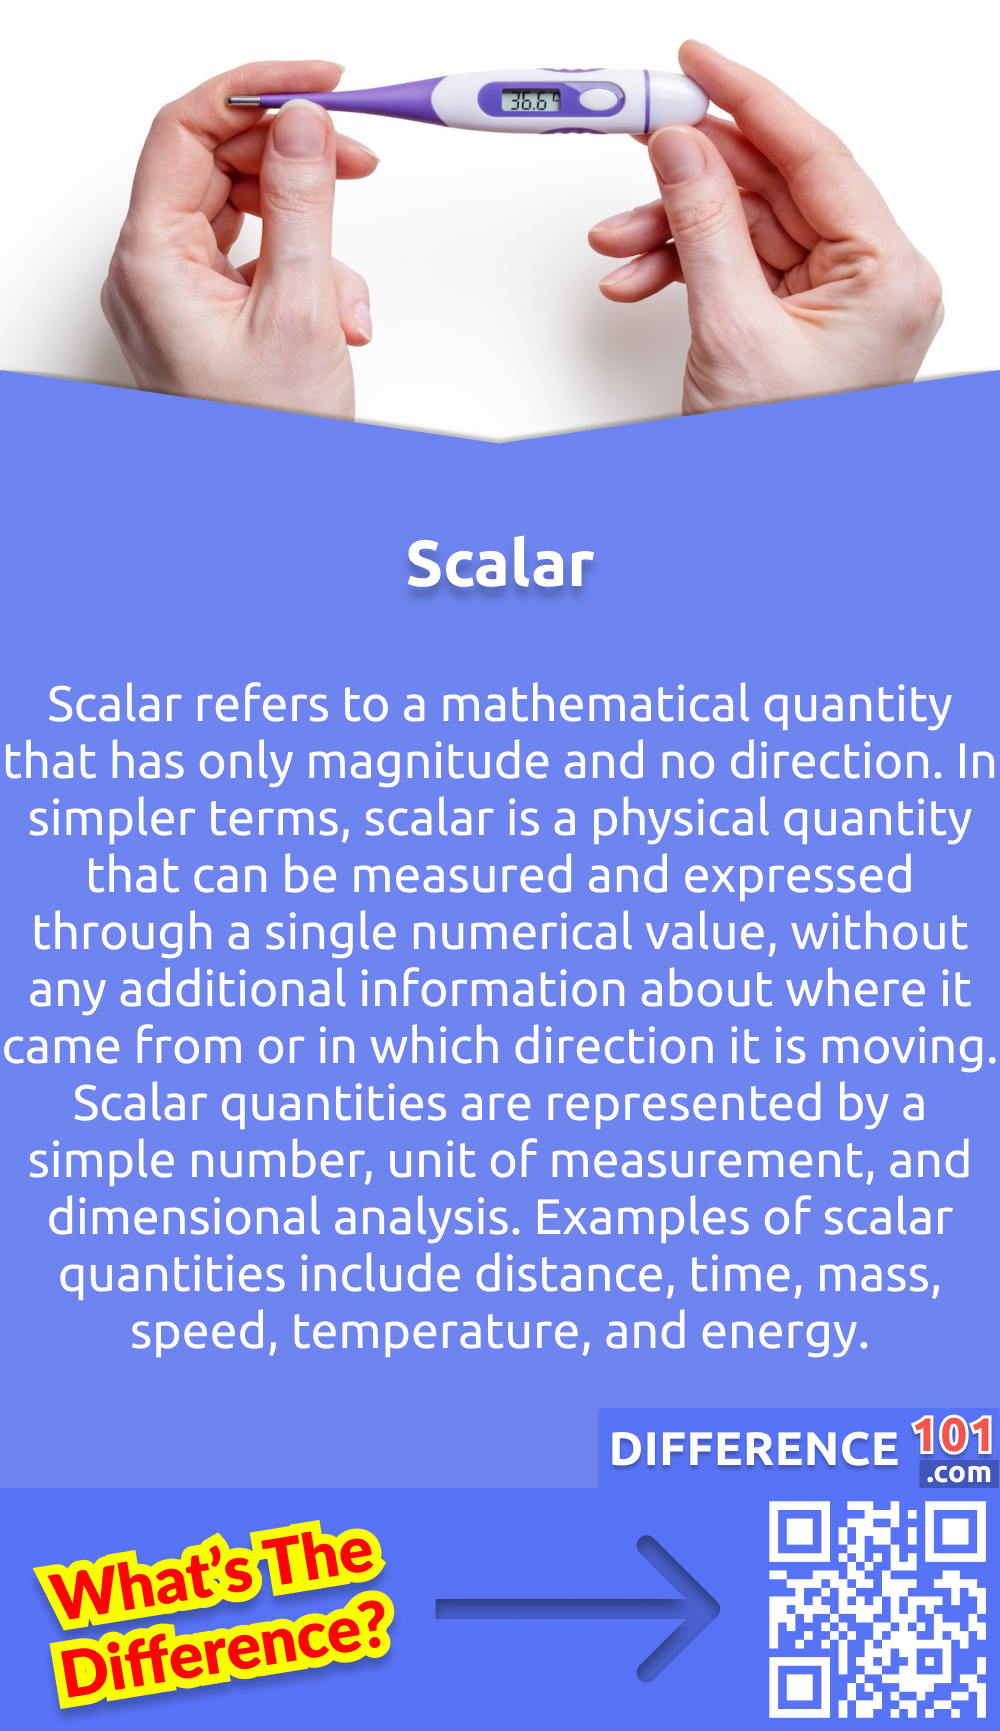 What Is Scalar? Scalar refers to a mathematical quantity that has only magnitude and no direction. In simpler terms, scalar is a physical quantity that can be measured and expressed through a single numerical value, without any additional information about where it came from or in which direction it is moving. Scalar quantities are represented by a simple number, unit of measurement, and dimensional analysis. Examples of scalar quantities include distance, time, mass, speed, temperature, and energy. Understanding scalars is essential to many fields of science, including physics, chemistry, and engineering, as it lays the foundation for the analysis of complex mathematical concepts and calculations.